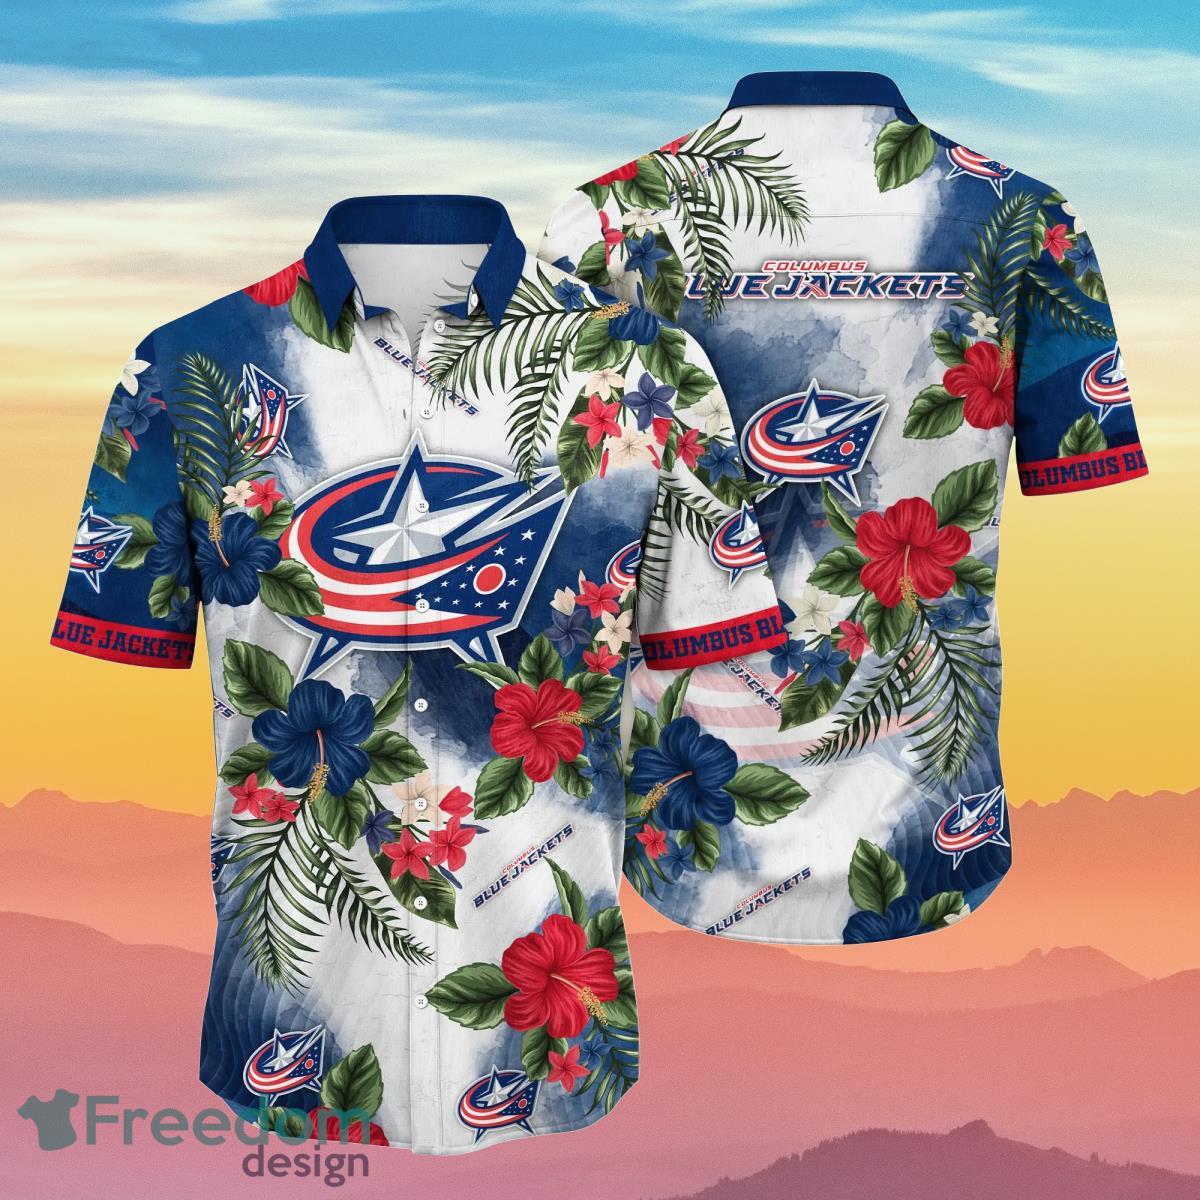 Chicago White Sox Summer Floral Polo Shirt - Freedomdesign